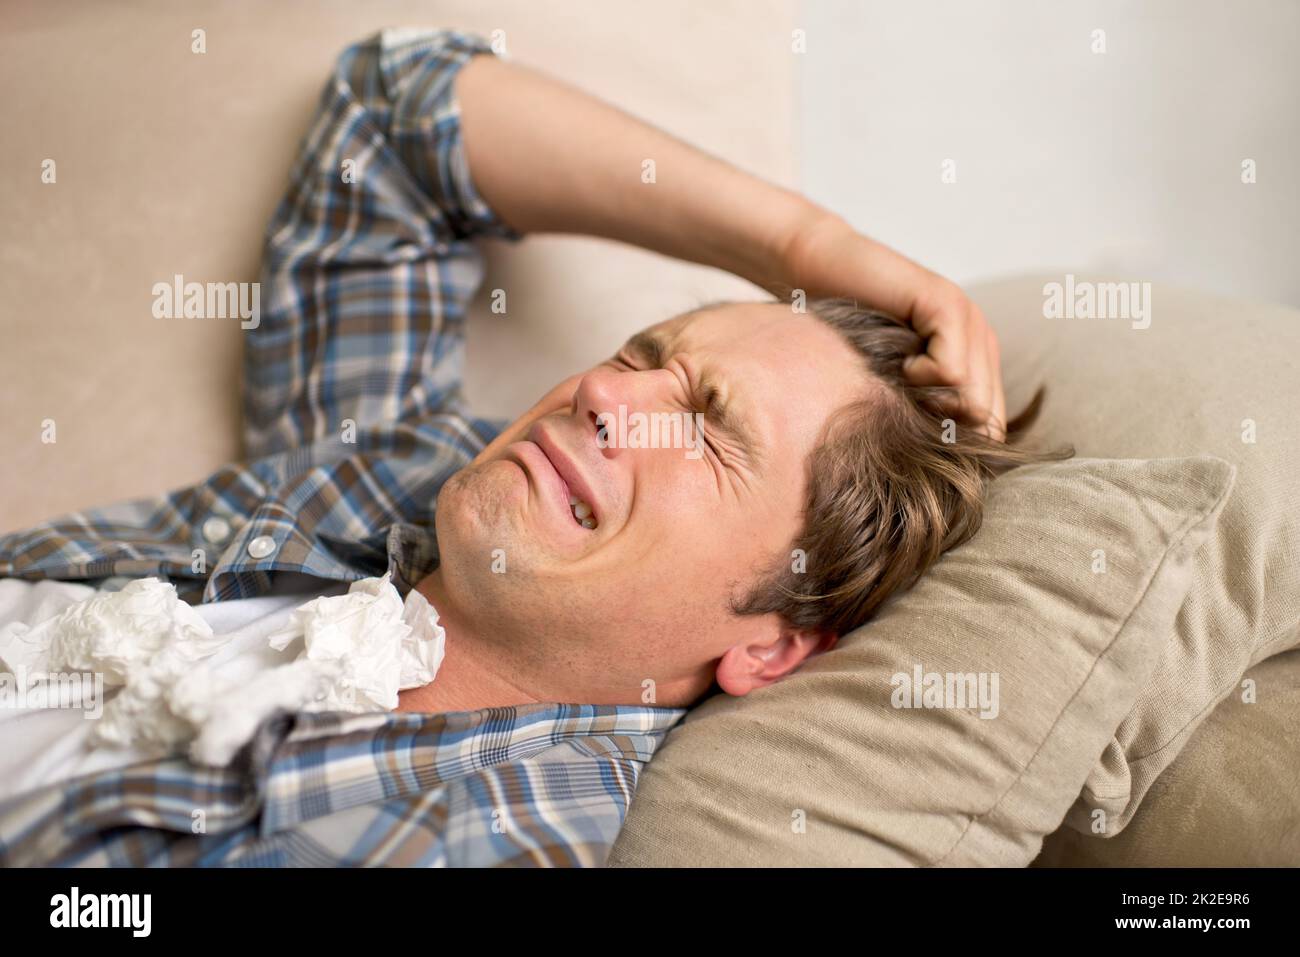 Dealing with a bad breakup. A young man crying while lying on the sofa with tissues. Stock Photo